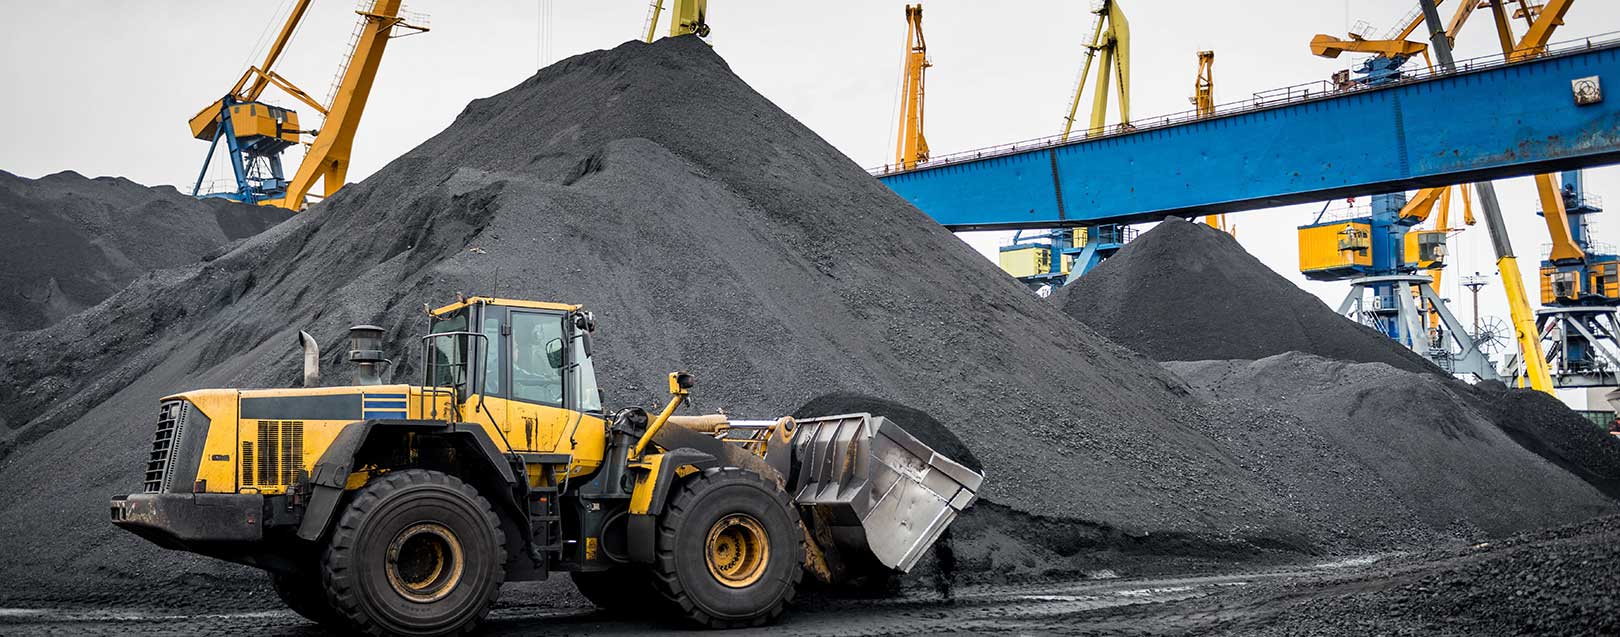 China to ban coal imports from small ports from July 1